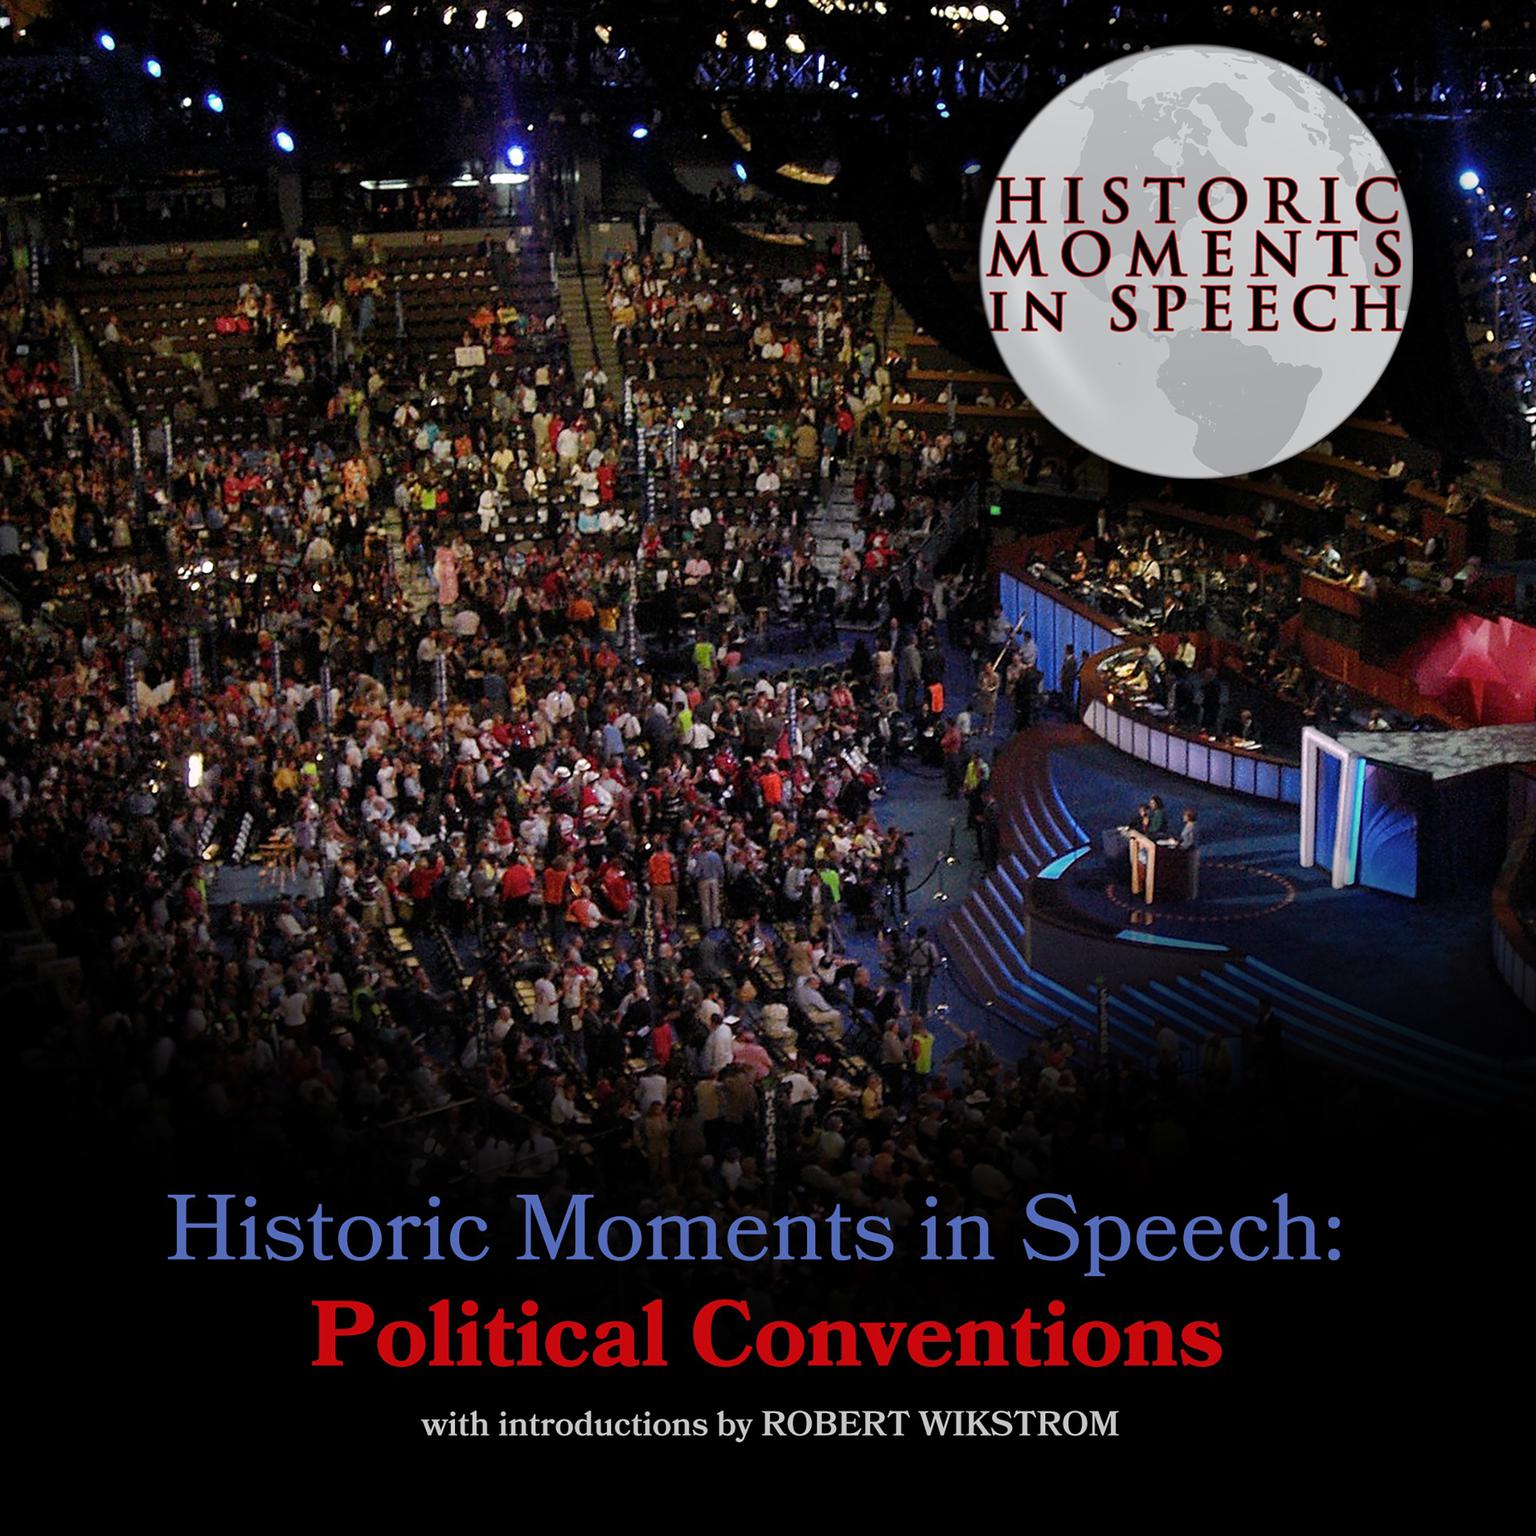 Political Conventions Audiobook, by the Speech Resource Company